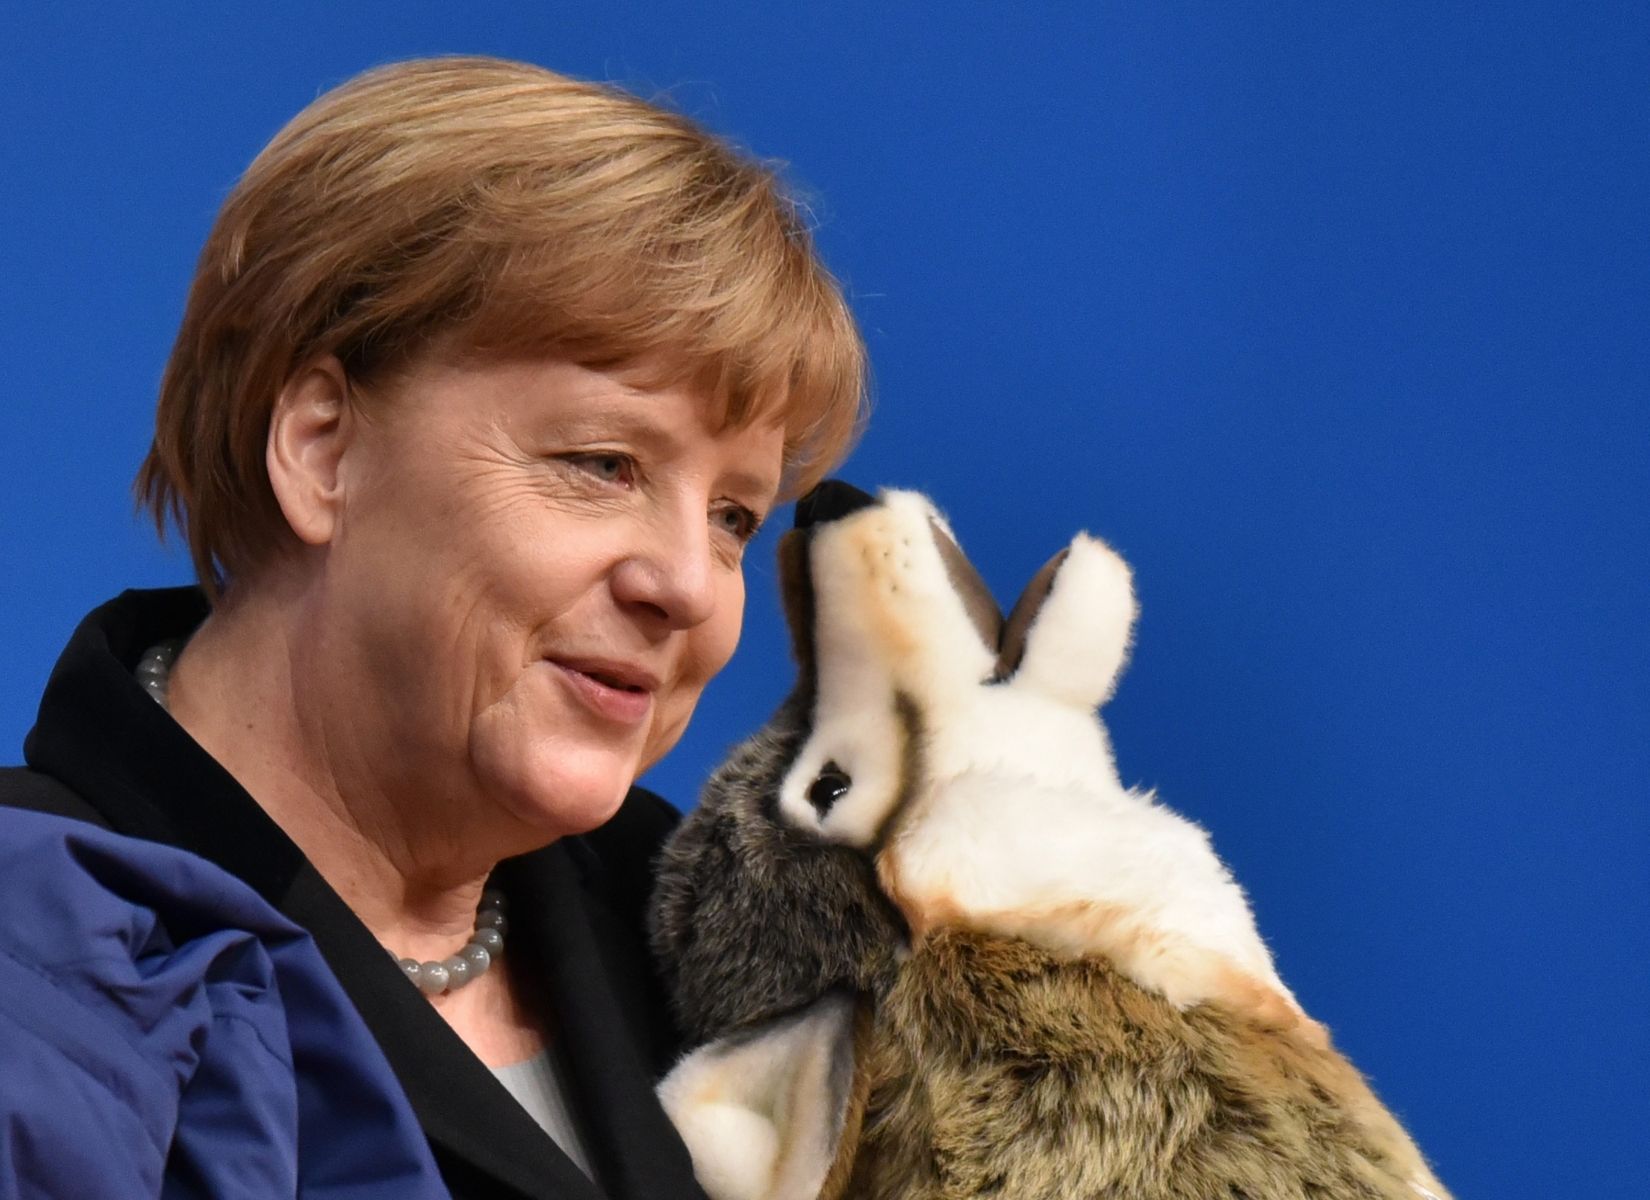 epa05068670 CDU federal chairwoman and Chancellor Angela Merkel holds a stuffed wolf at the CDU (Christian Democratic Party) federal party congress in Karlsruhe, Germany, 14 December 2015. The CDU is discussing, among other things, asylum policy. With an eye to the coming state parliamentary elections in March, CDU top-candidtate Guido Wolf declared Baden-Wuerttemberg 'Wolf's state of expectation' and gave Angela Merkel the stuffed wolf.  EPA/UWE ANSPACH GERMANY PARTIES CDU PARTY CONVENTION